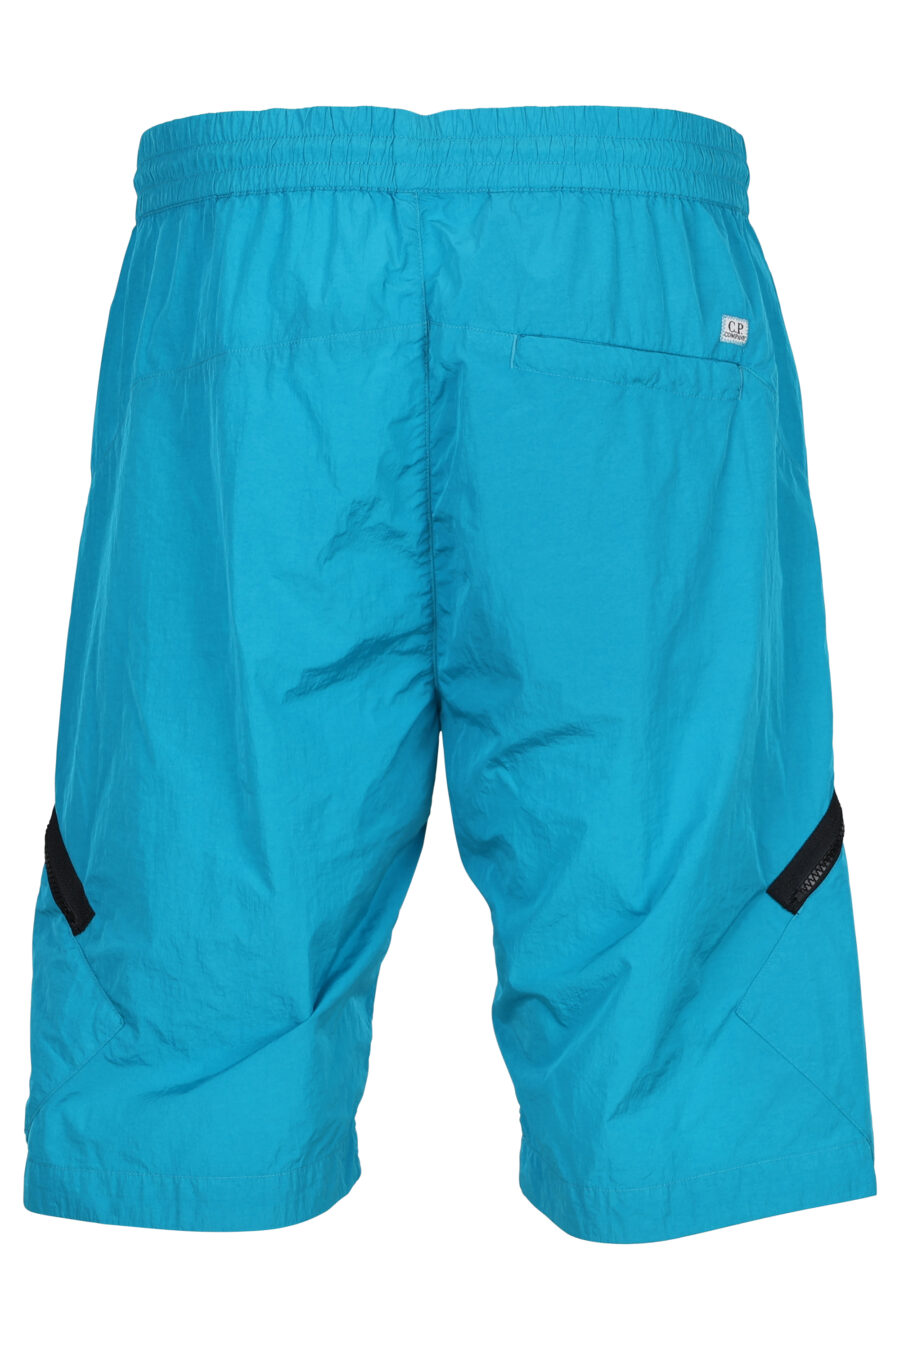 Turquoise blue shorts with diagonal zip and lens logo - 7620943384529 2